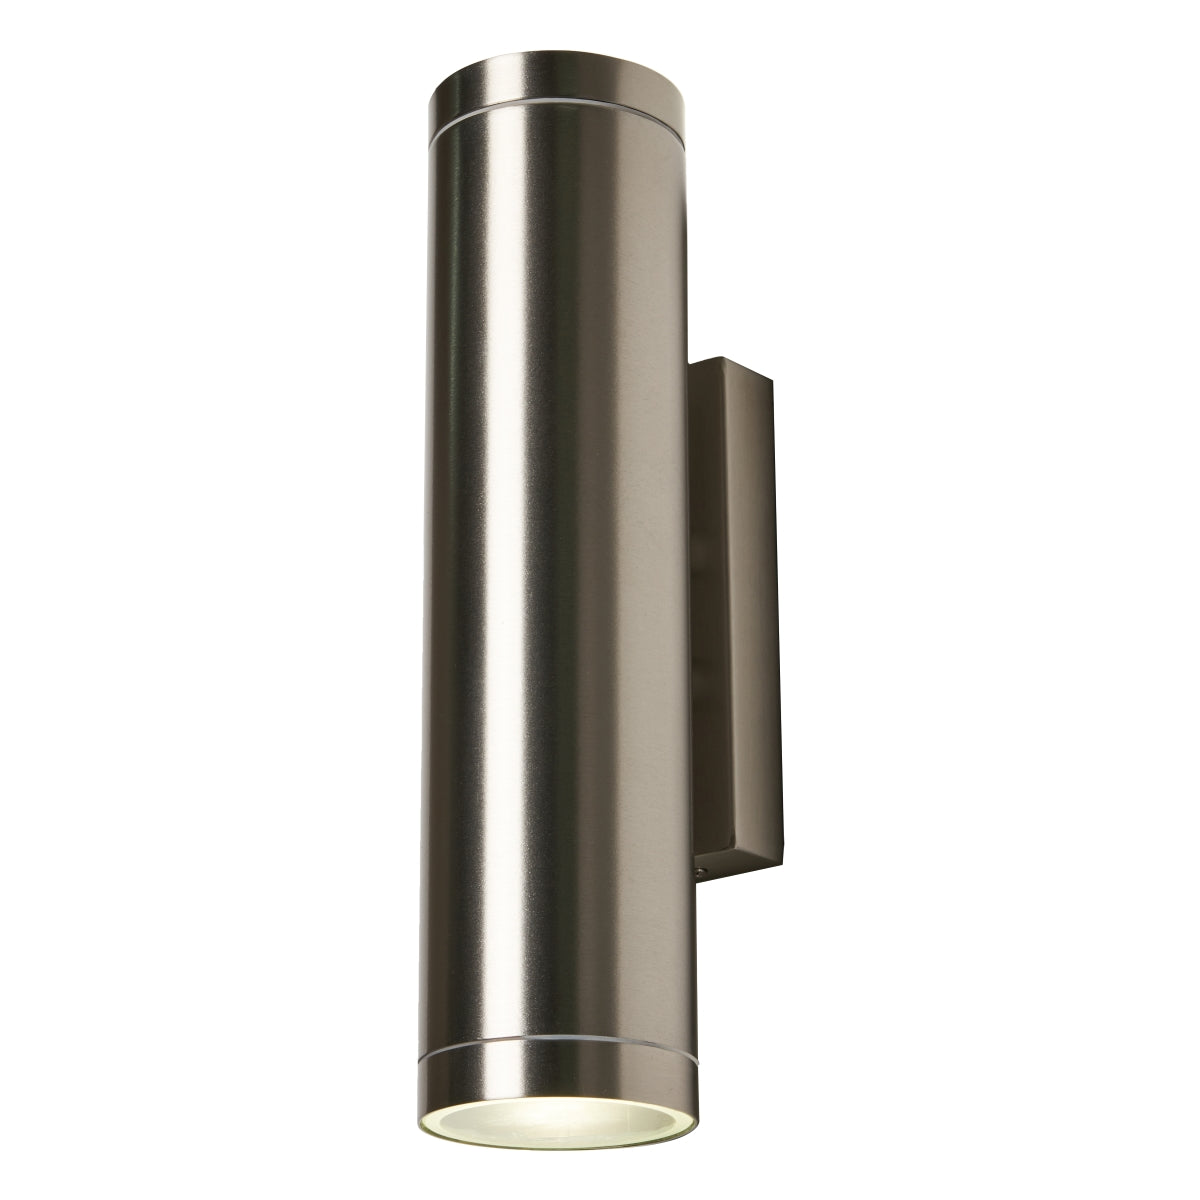 Our Lucas stainless steel extra long outdoor wall mounted up and down cylinder outdoor light would look perfect in a modern or more traditional home design. Outside wall lights can provide atmospheric light in your garden, at the front door or on the terrace as well as a great security solution. It is designed for durability and longevity with its robust material producing a fully weatherproof and water resistant light fitting.